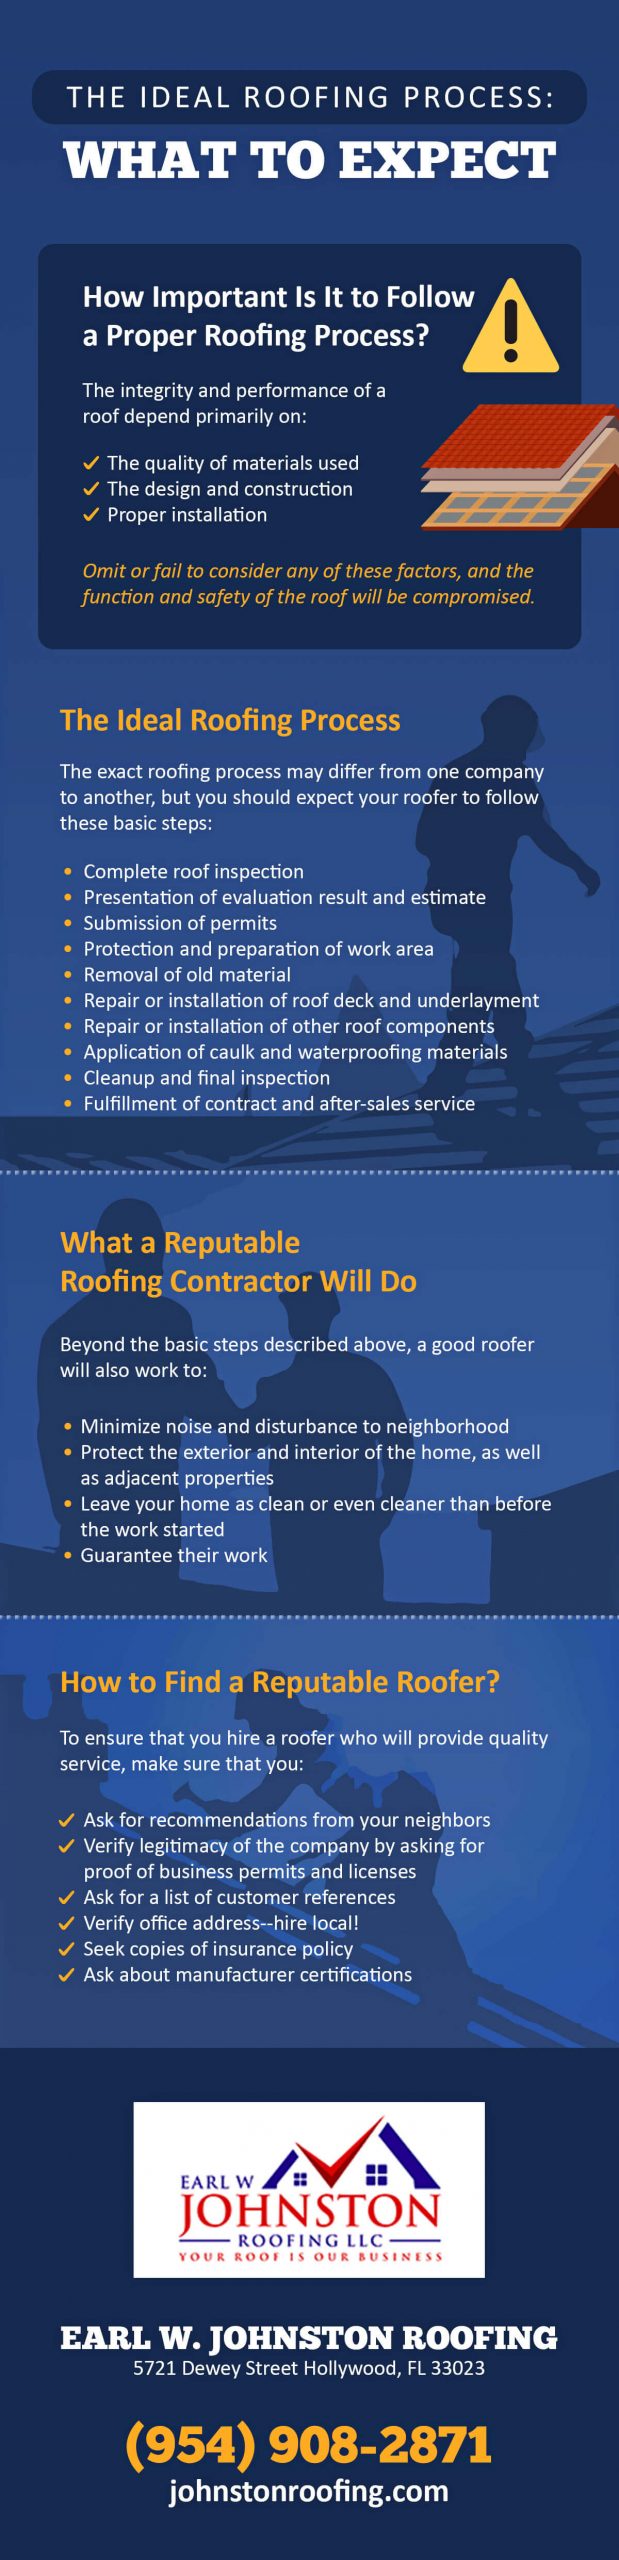 [INFOGRAPHIC] The Ideal Roofing Process: What To Expect